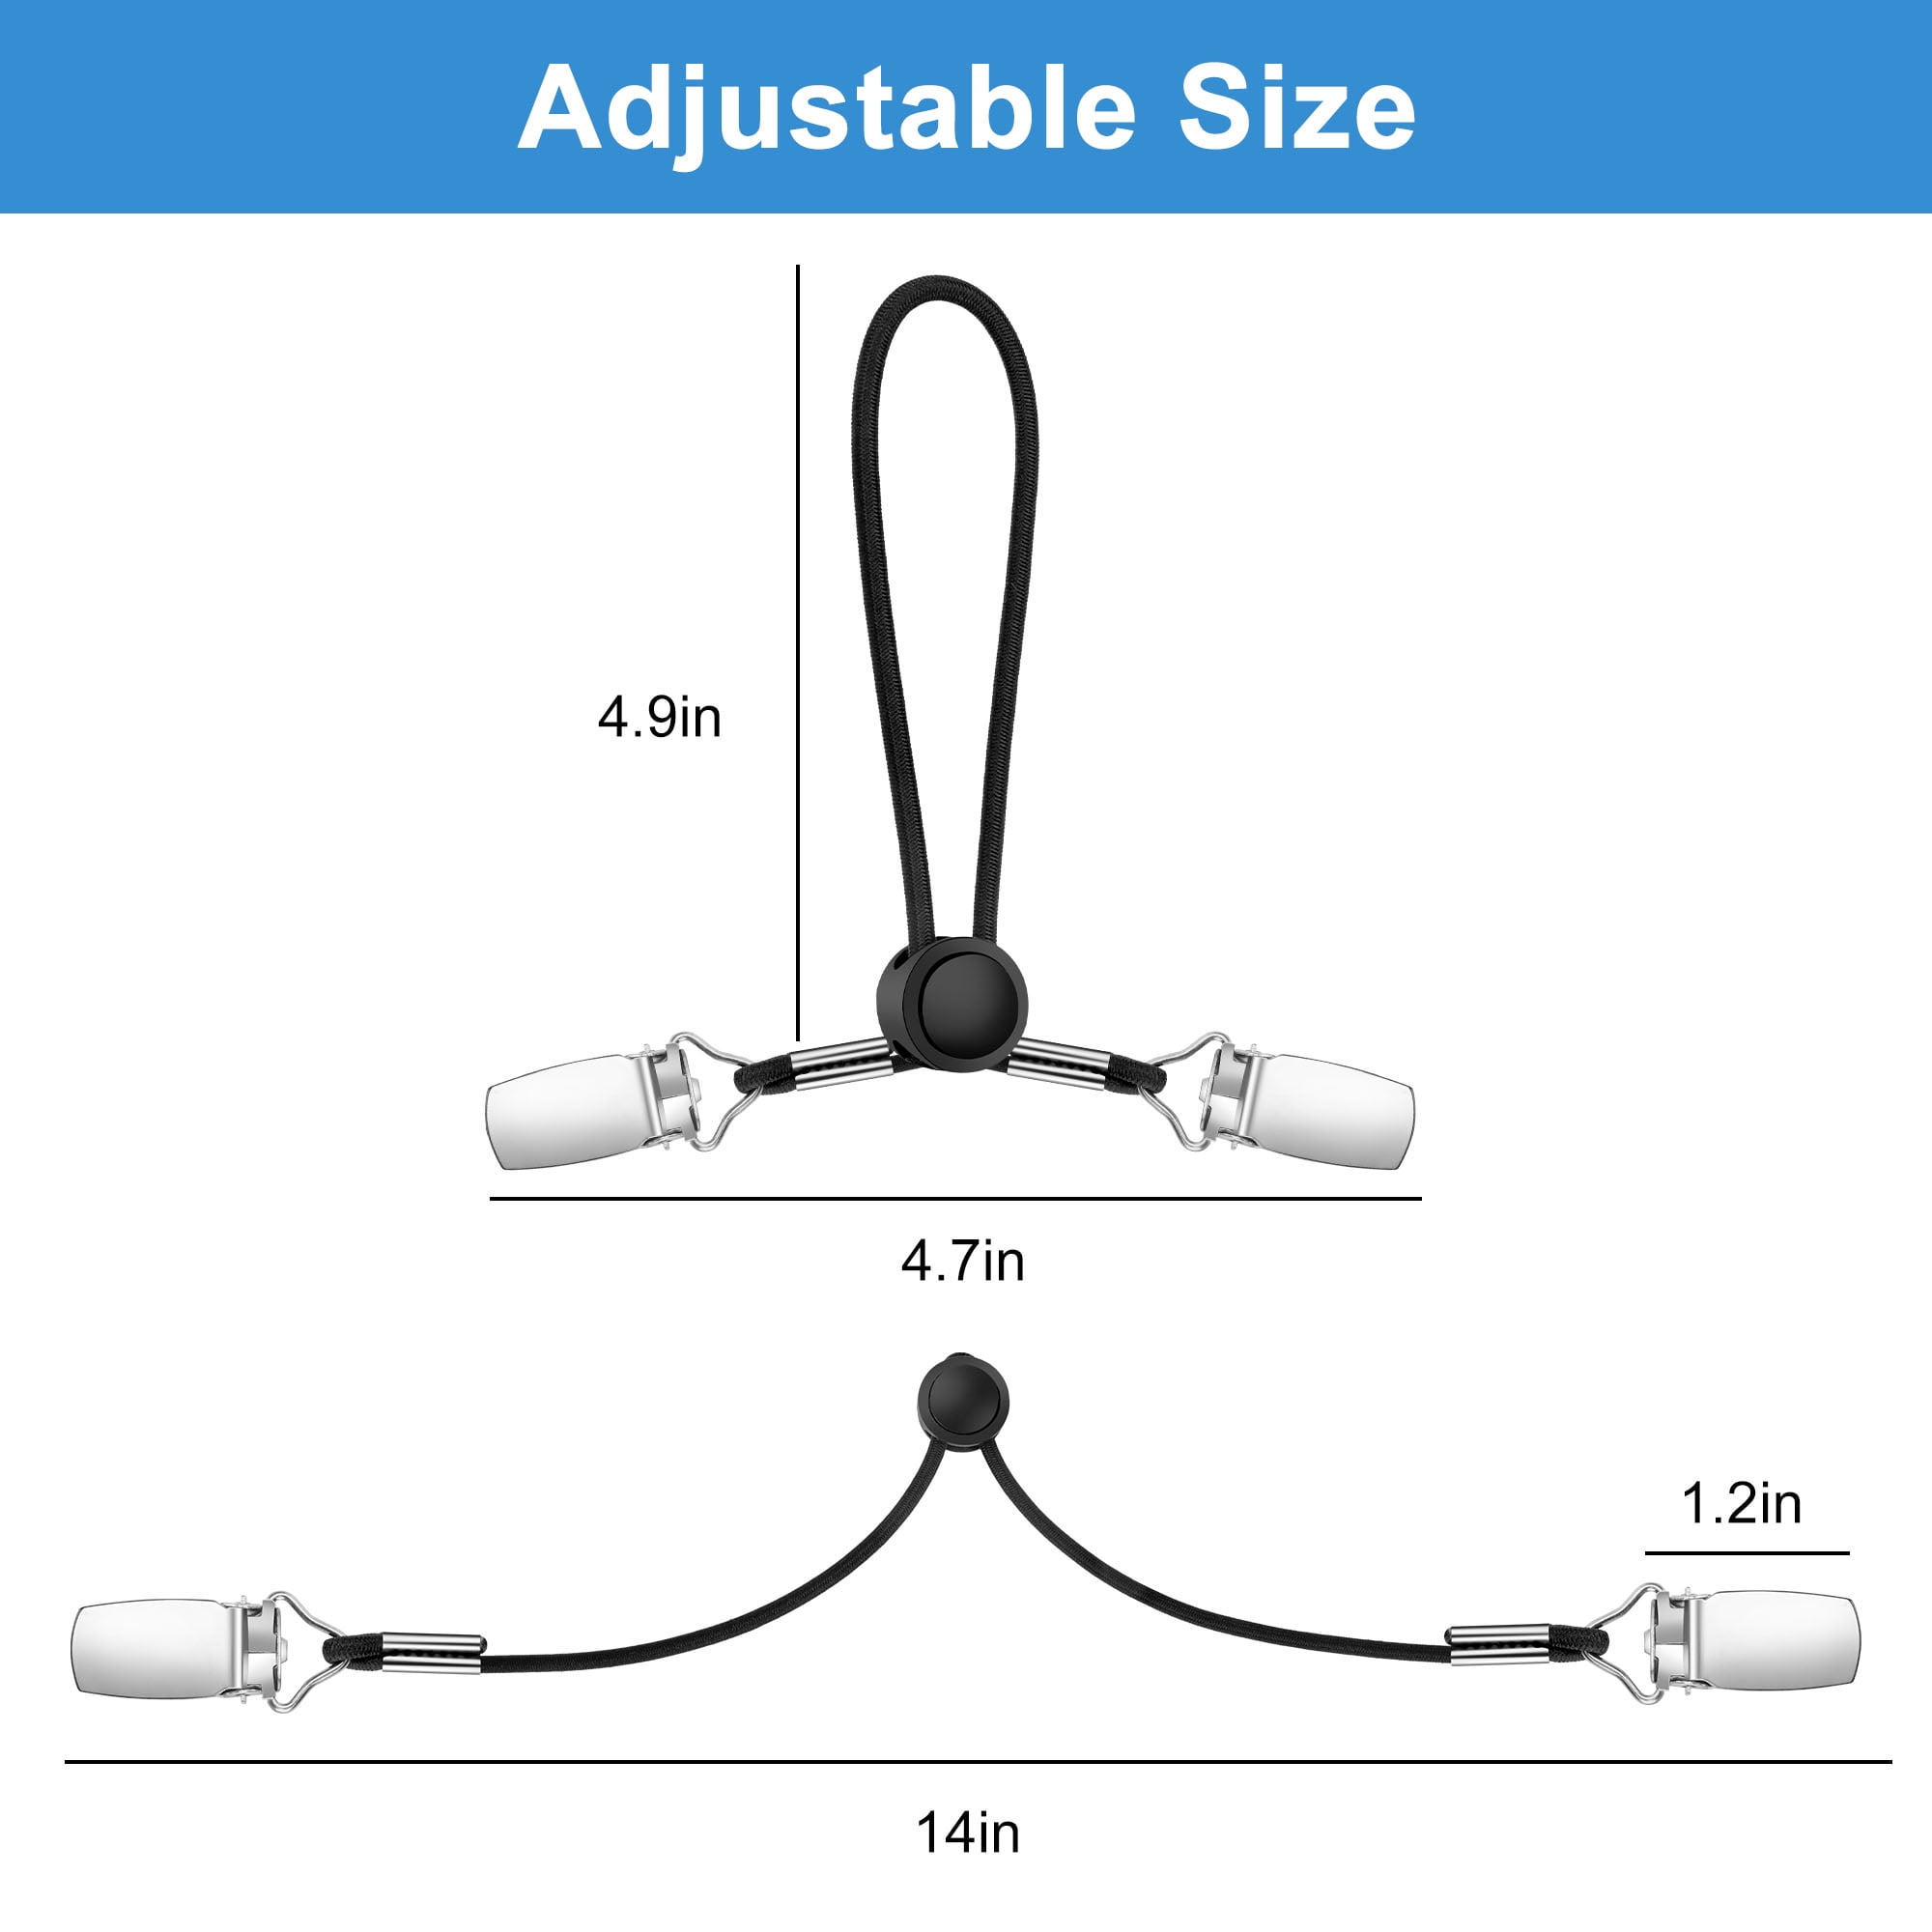 TSV Adjustable Heavy Duty Bed Sheet Grippers Holders Cover Suspenders, White(Set of 4)